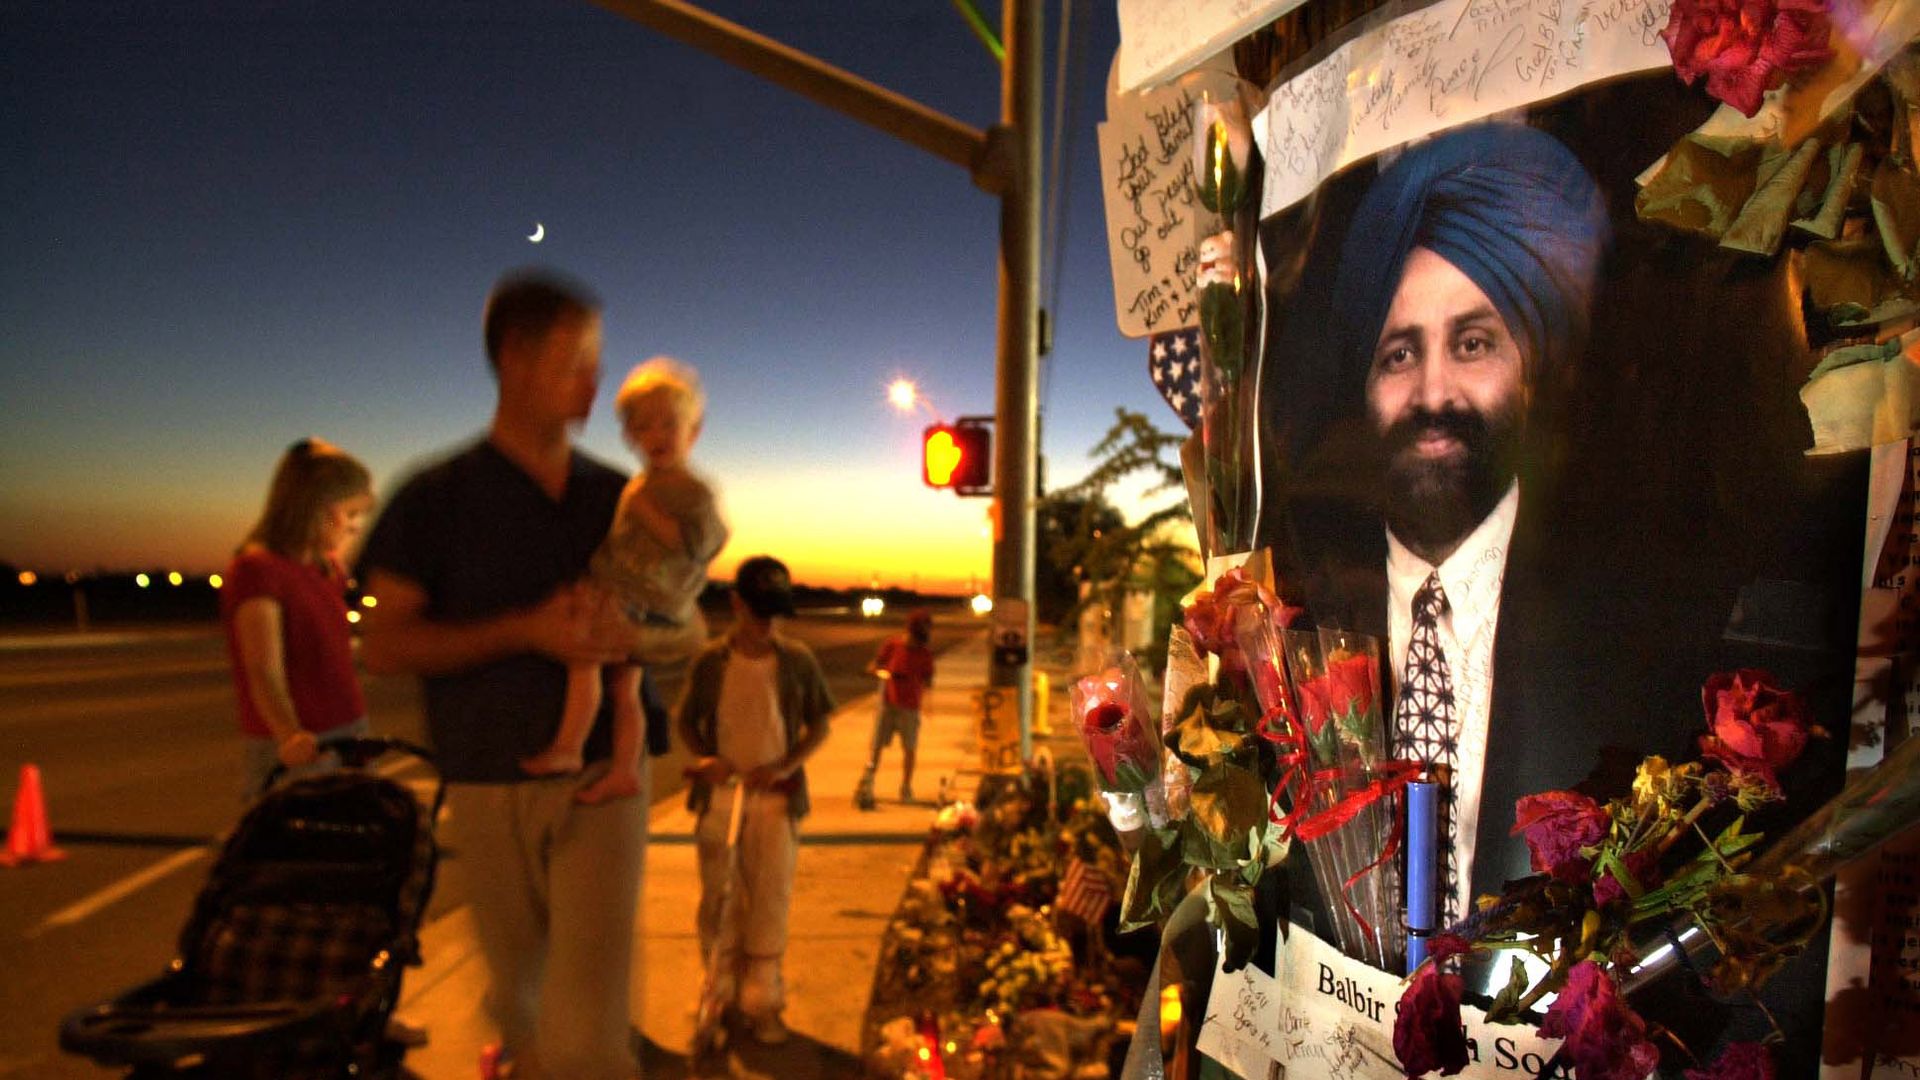 Photo of a picture of Balbir Singh Sodhi plastered on a pole at a memorial site as people look 